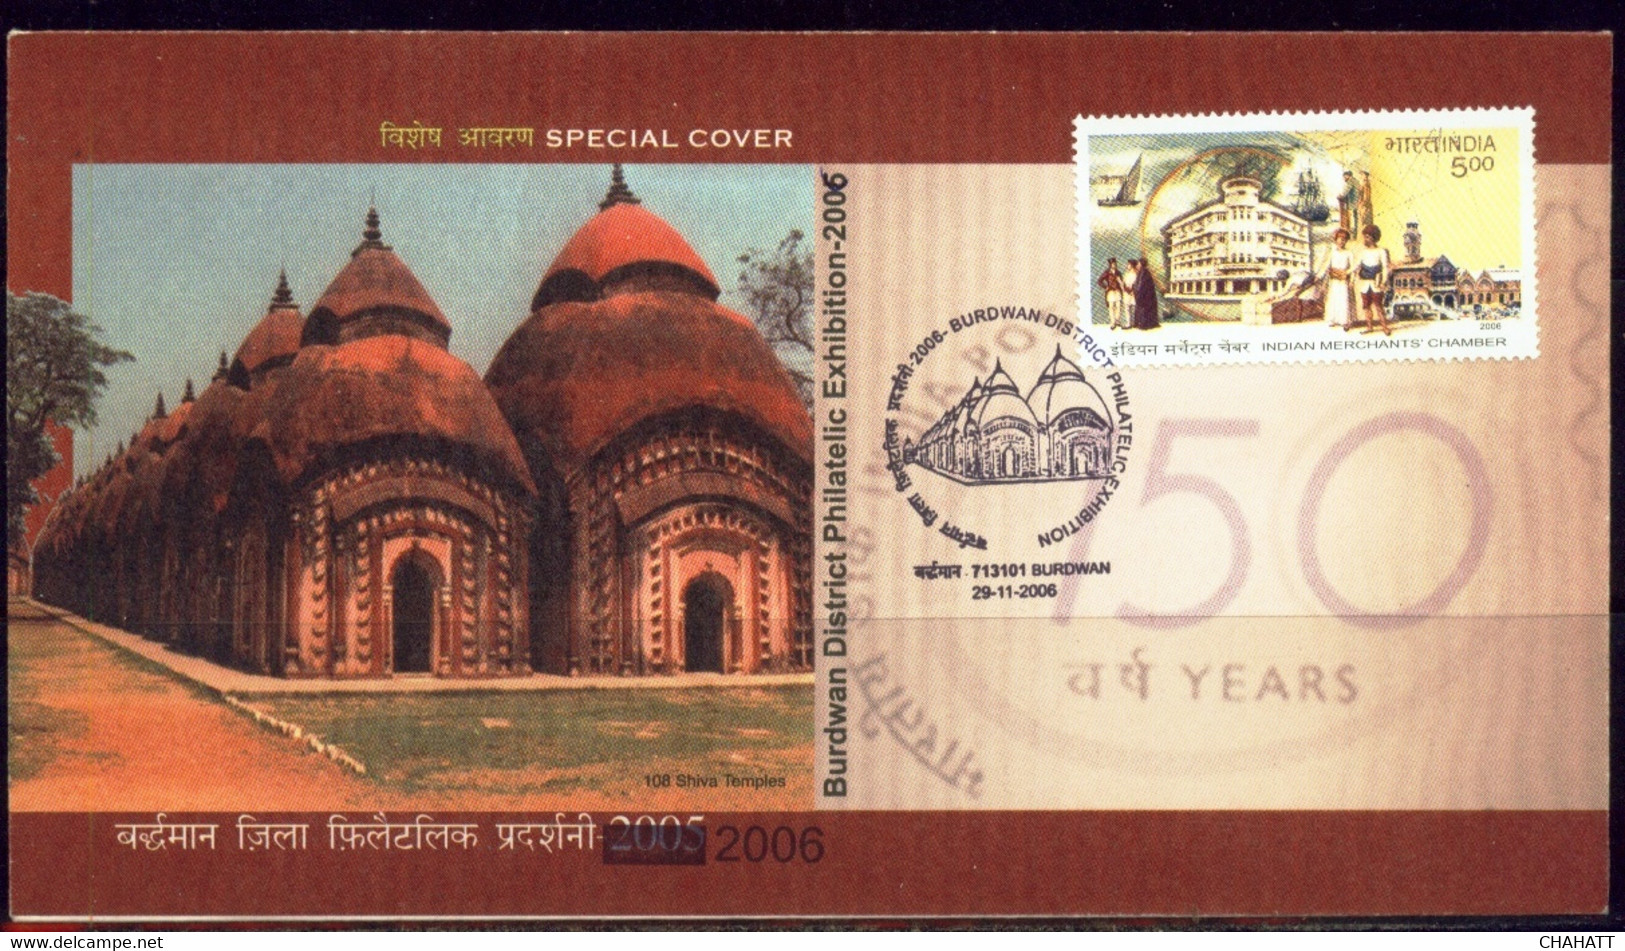 HINDUISM- LORD SHIVA- TERRACOTTA TEMPLE-BURDWAN-SPECIAL COVER- PICTORIAL CANCEL-USED-INDIA-2006-BX3-41 - Induismo